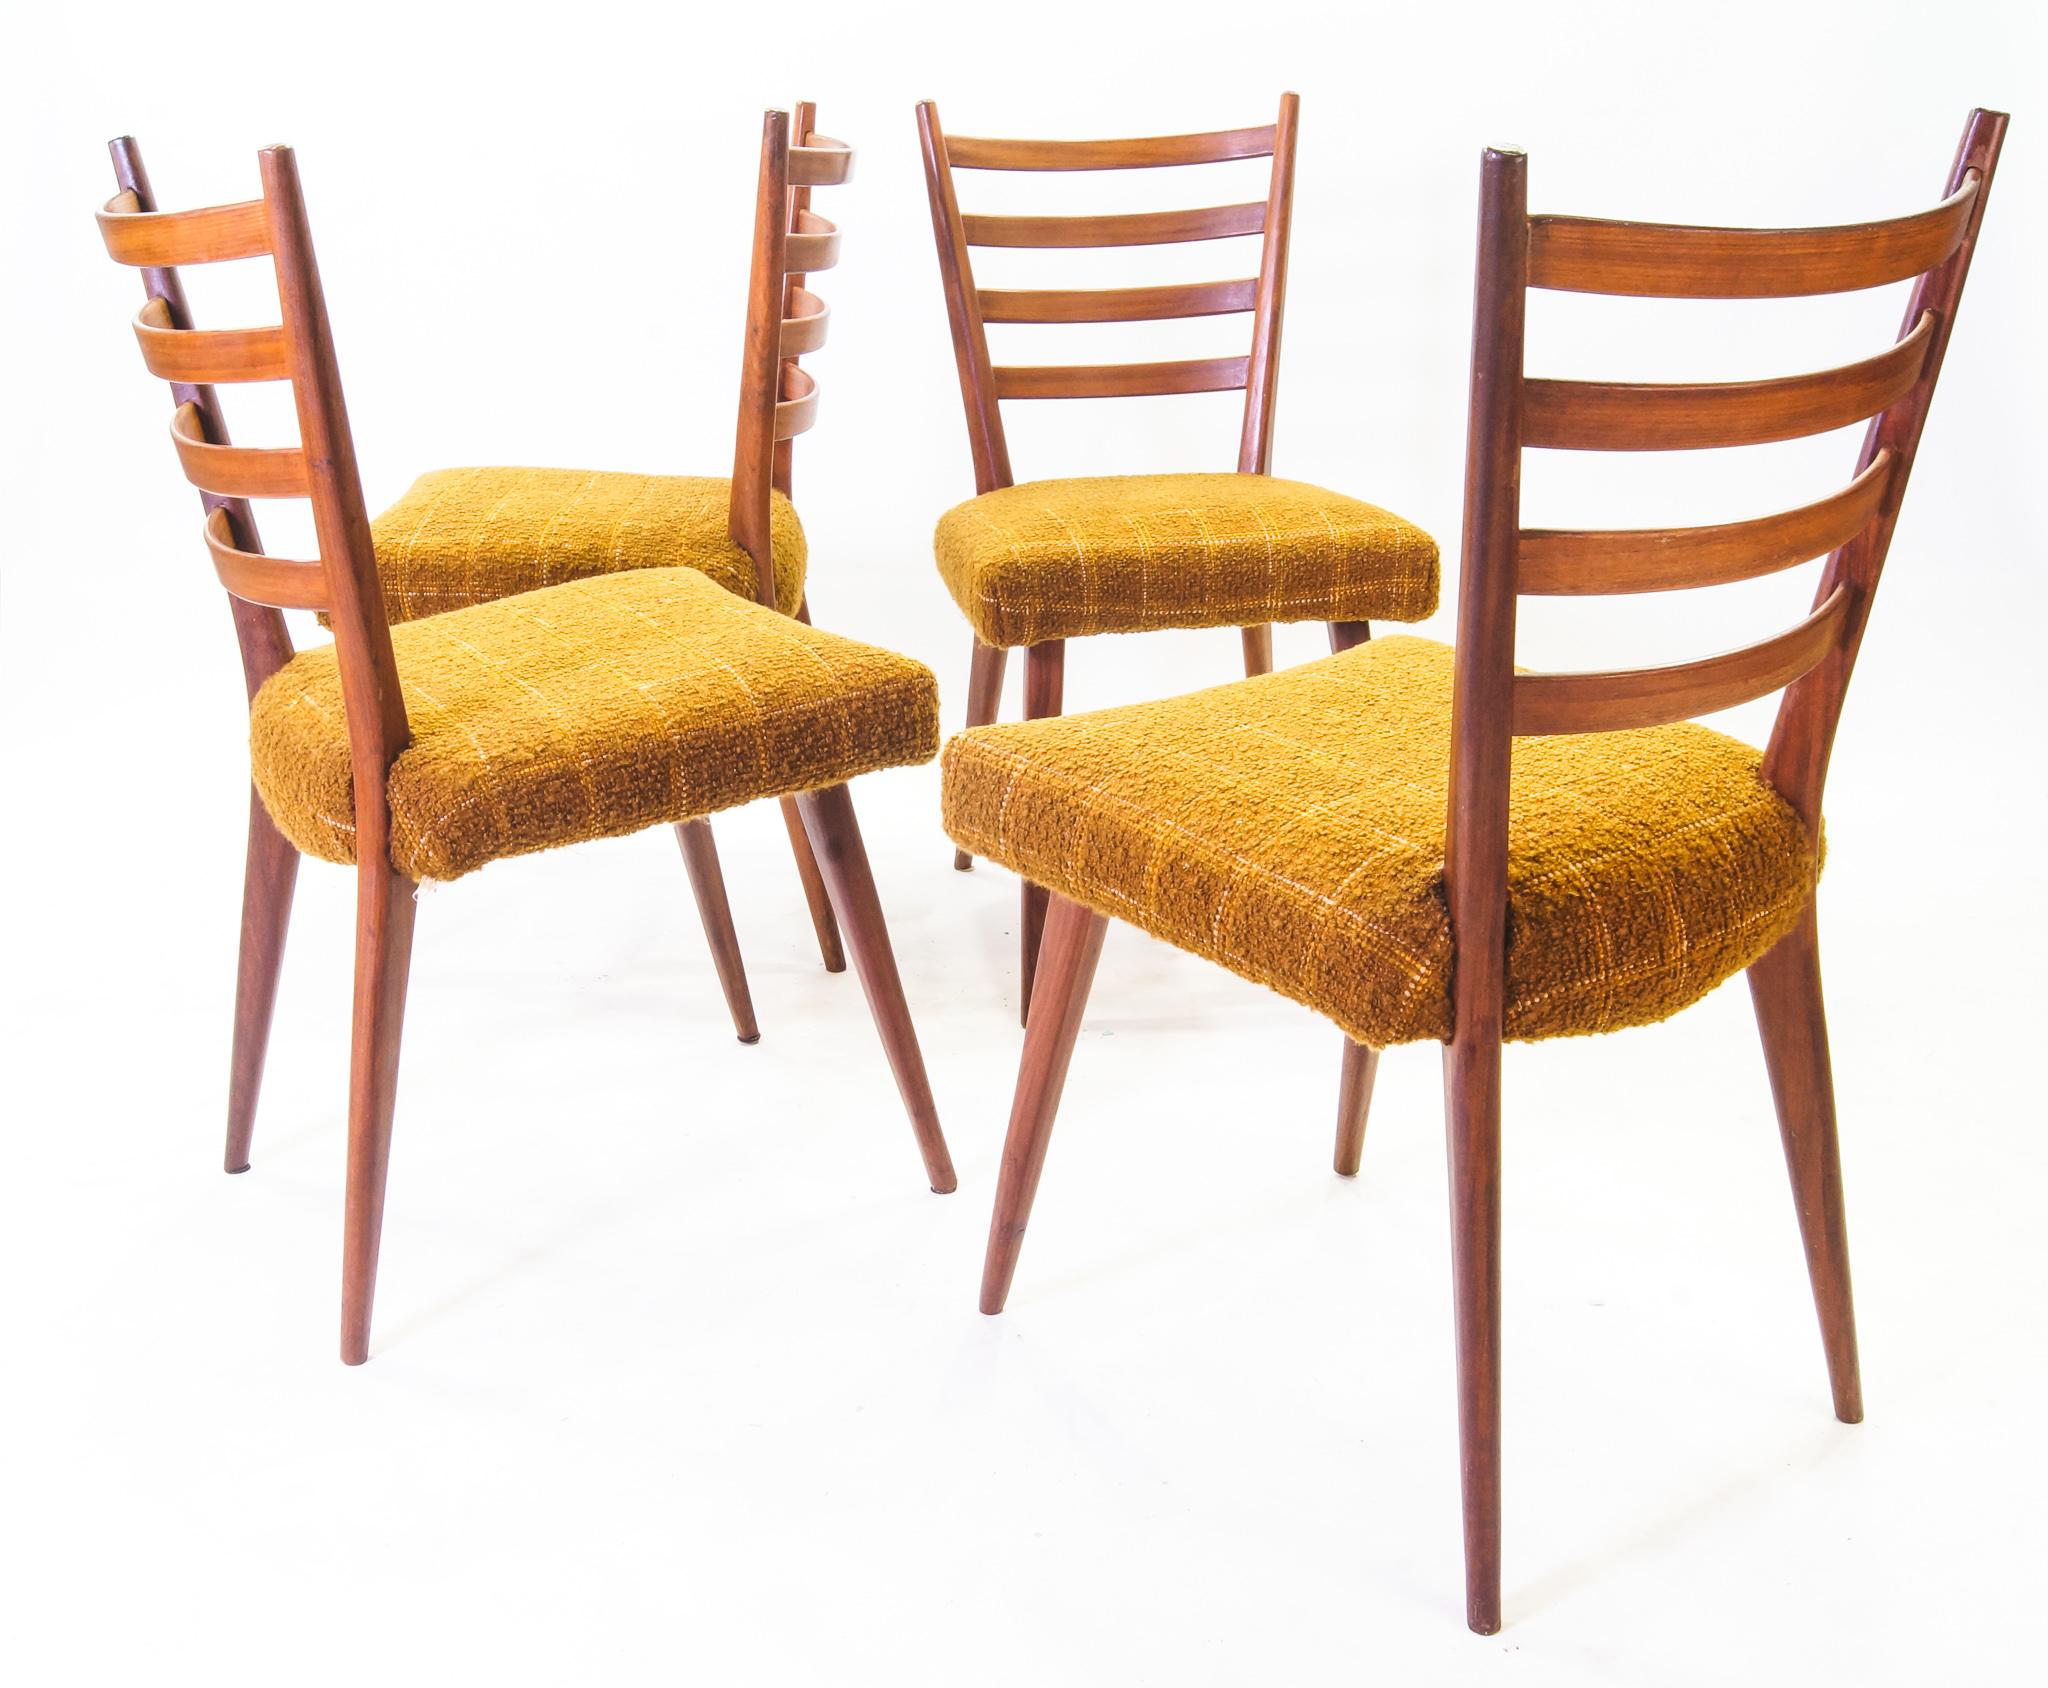 Cees Braakman for Pastoe - Ladder Chairs, 1950's - Dinerset of 6 4